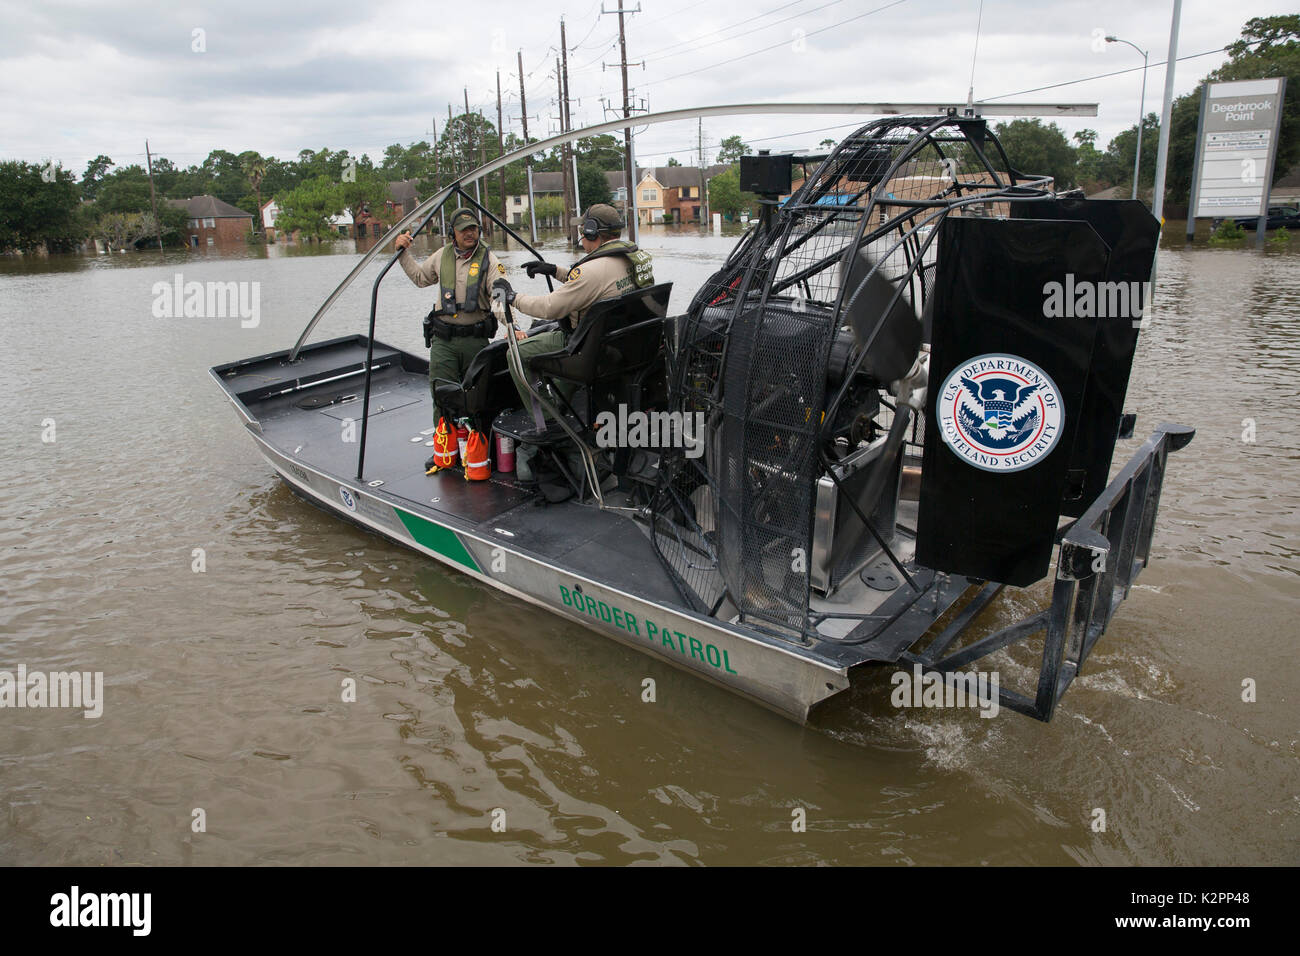 Houston, United States. 30th Aug, 2017. U.S Border Patrol riverine agents on an air boat patrol a neighborhood flooded by rising waters to assist in evacuating resident in the aftermath of Hurricane Harvey August 30, 2017 in Houston, Texas. Credit: Planetpix/Alamy Live News Stock Photo